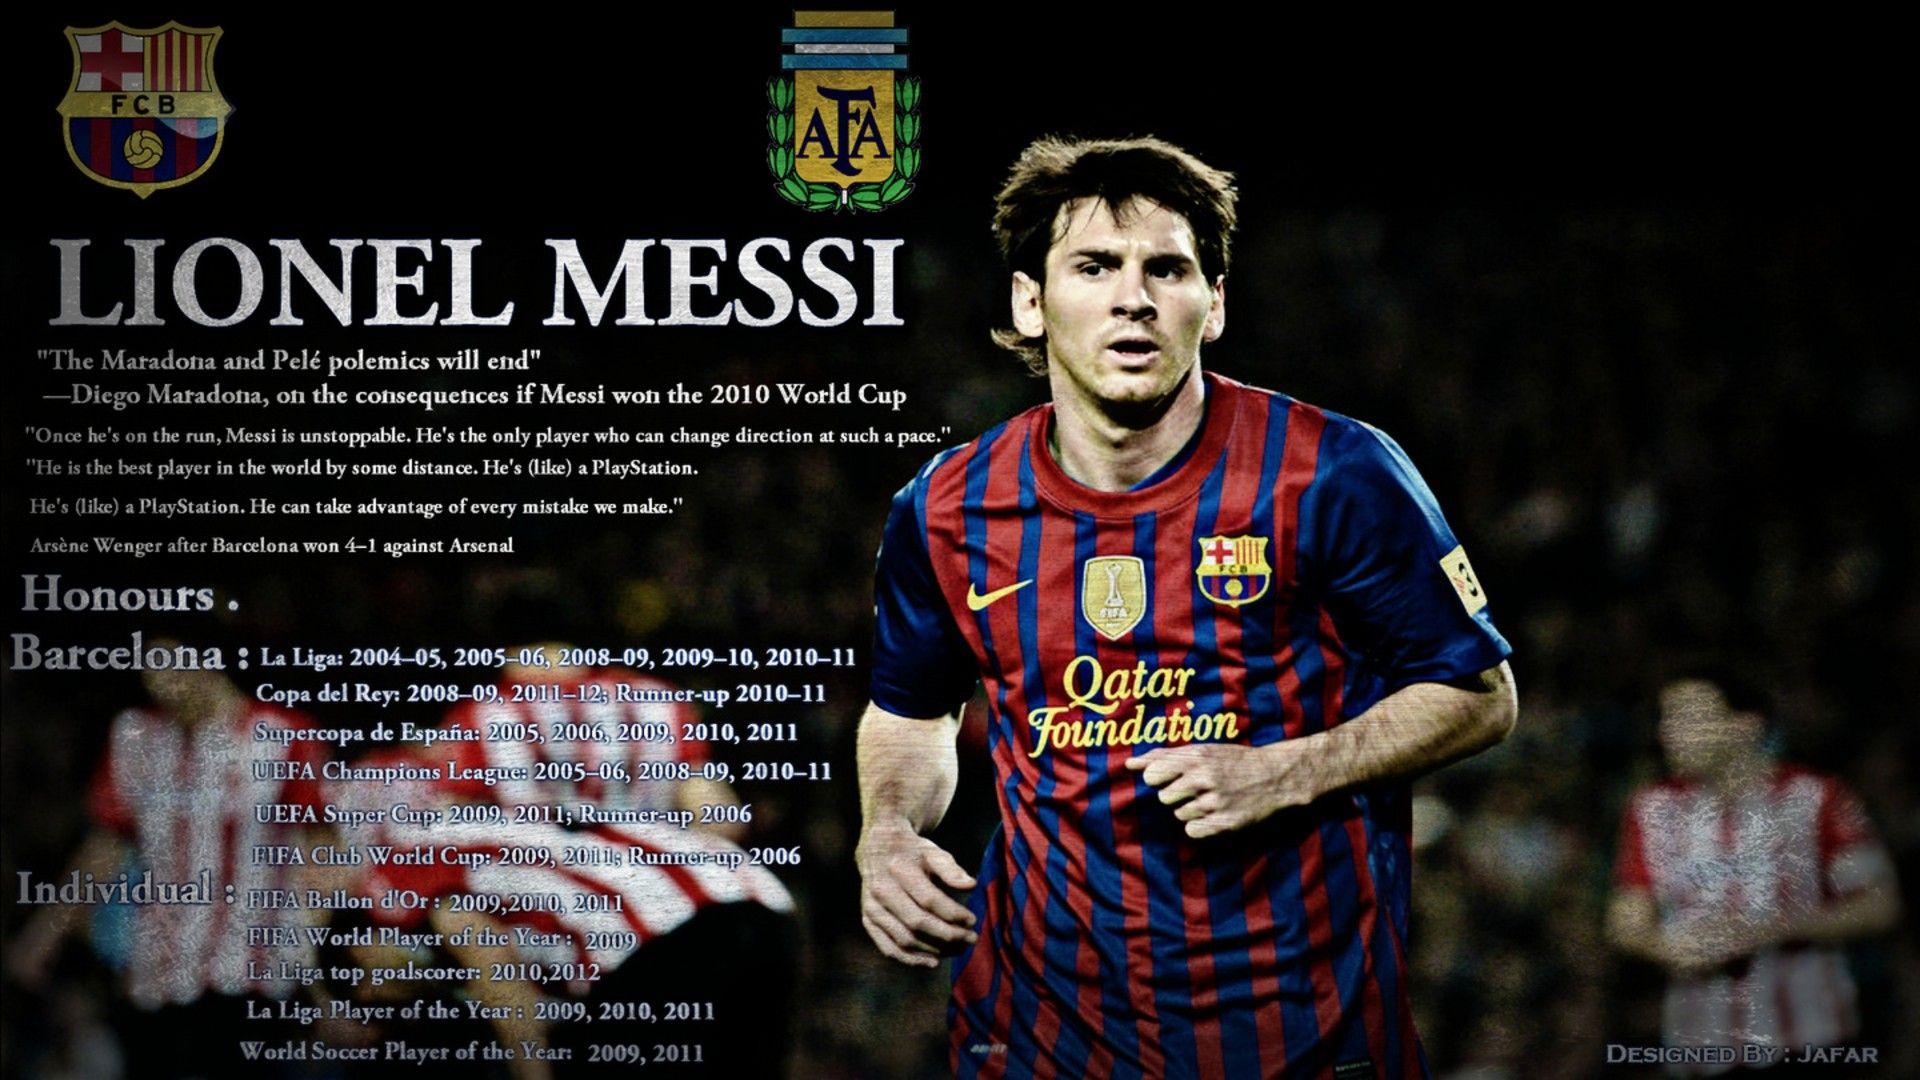 sports, soccer, Lionel Messi, FC Barcelona, football stars, soccer stars, Leo Messi, Messi, FCB, football players wallpaper